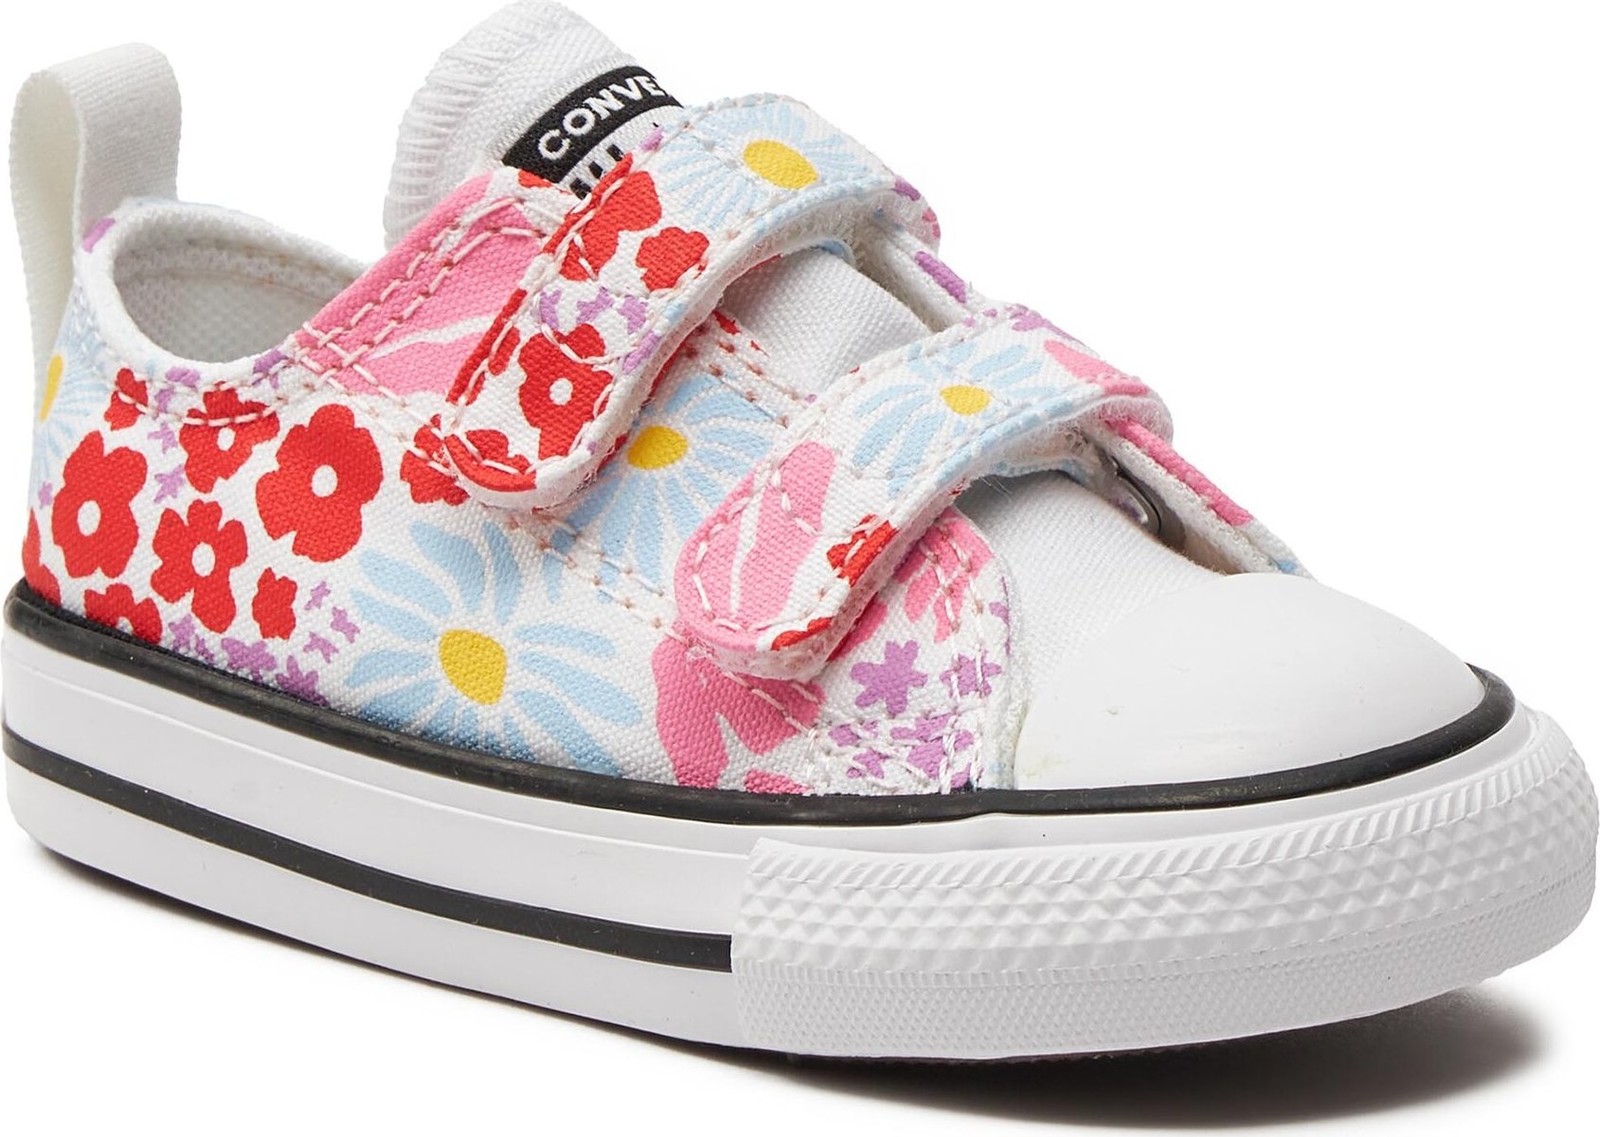 Plátěnky Converse Chuck Taylor All Star Easy On Floral A06340C White/True Sky/Oops Pink